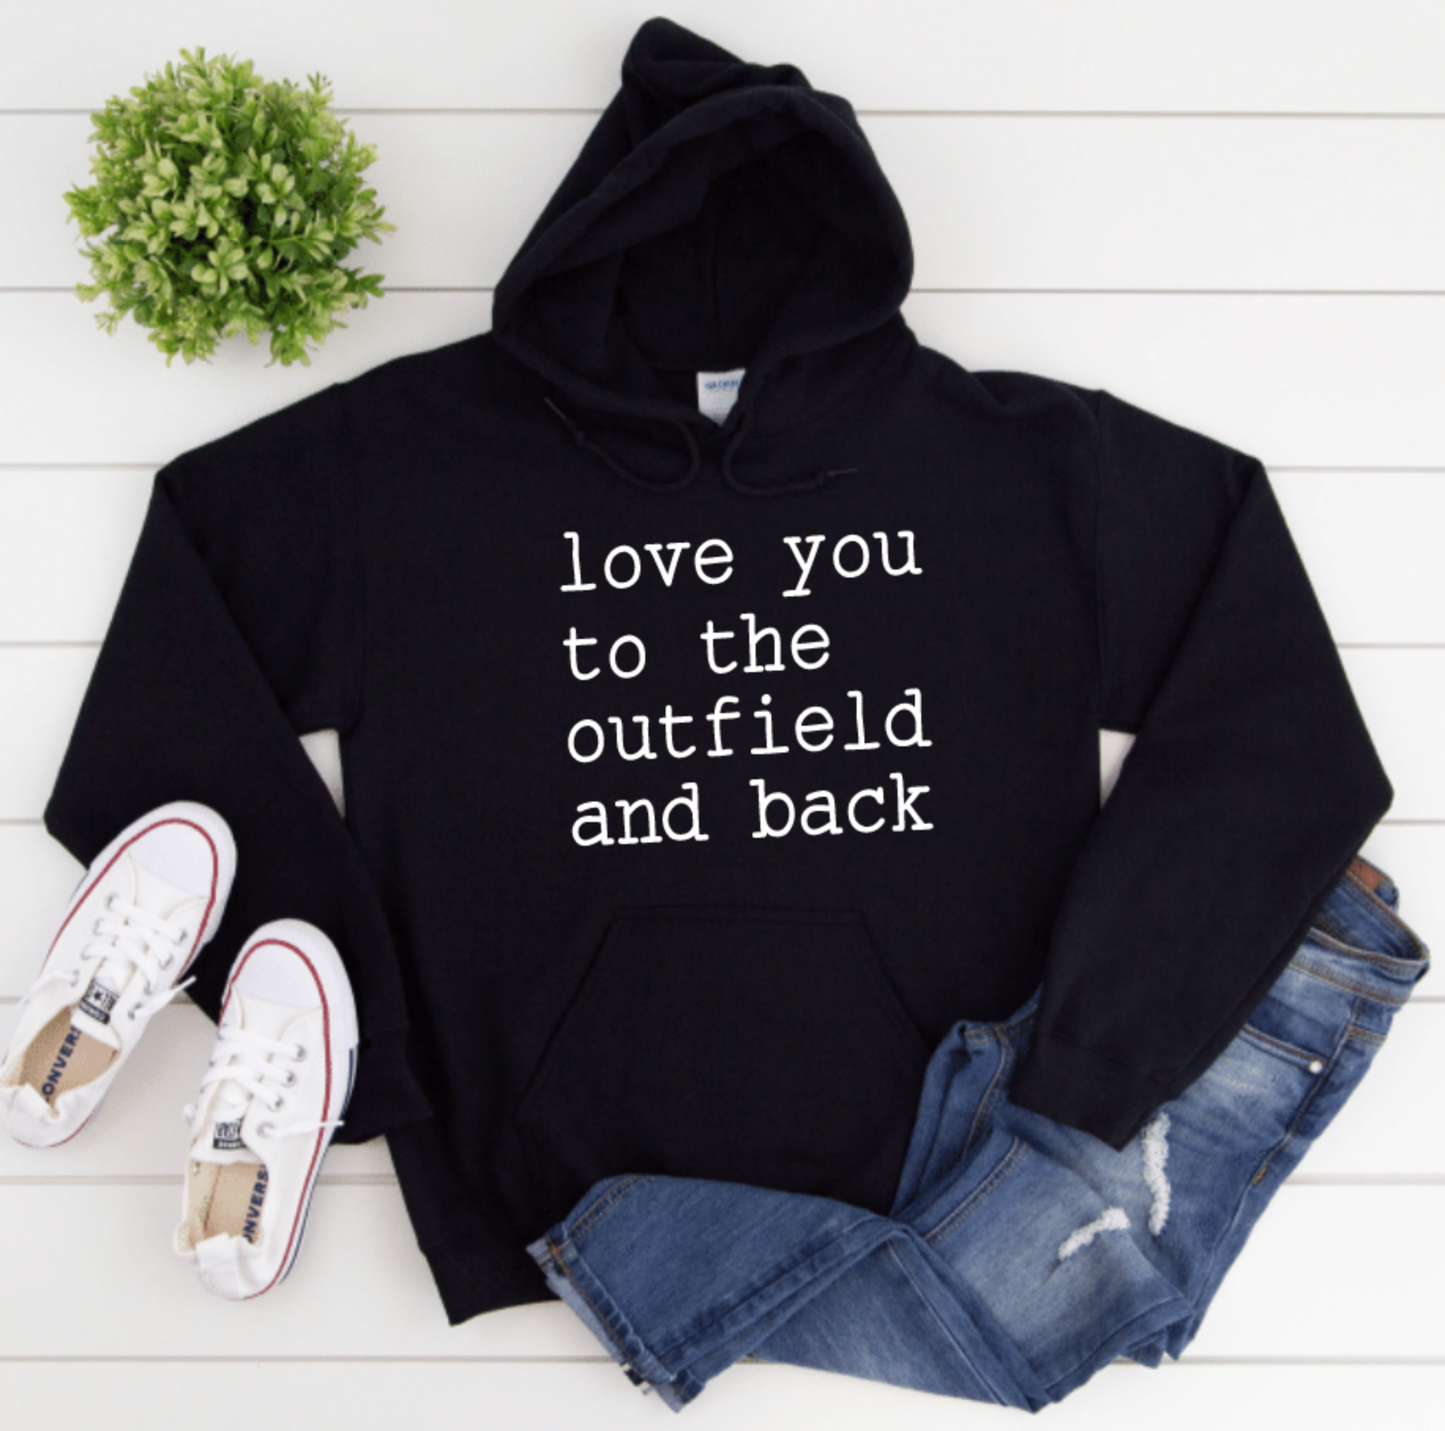 LOVE YOU TO THE OUTFIELD AND BACK